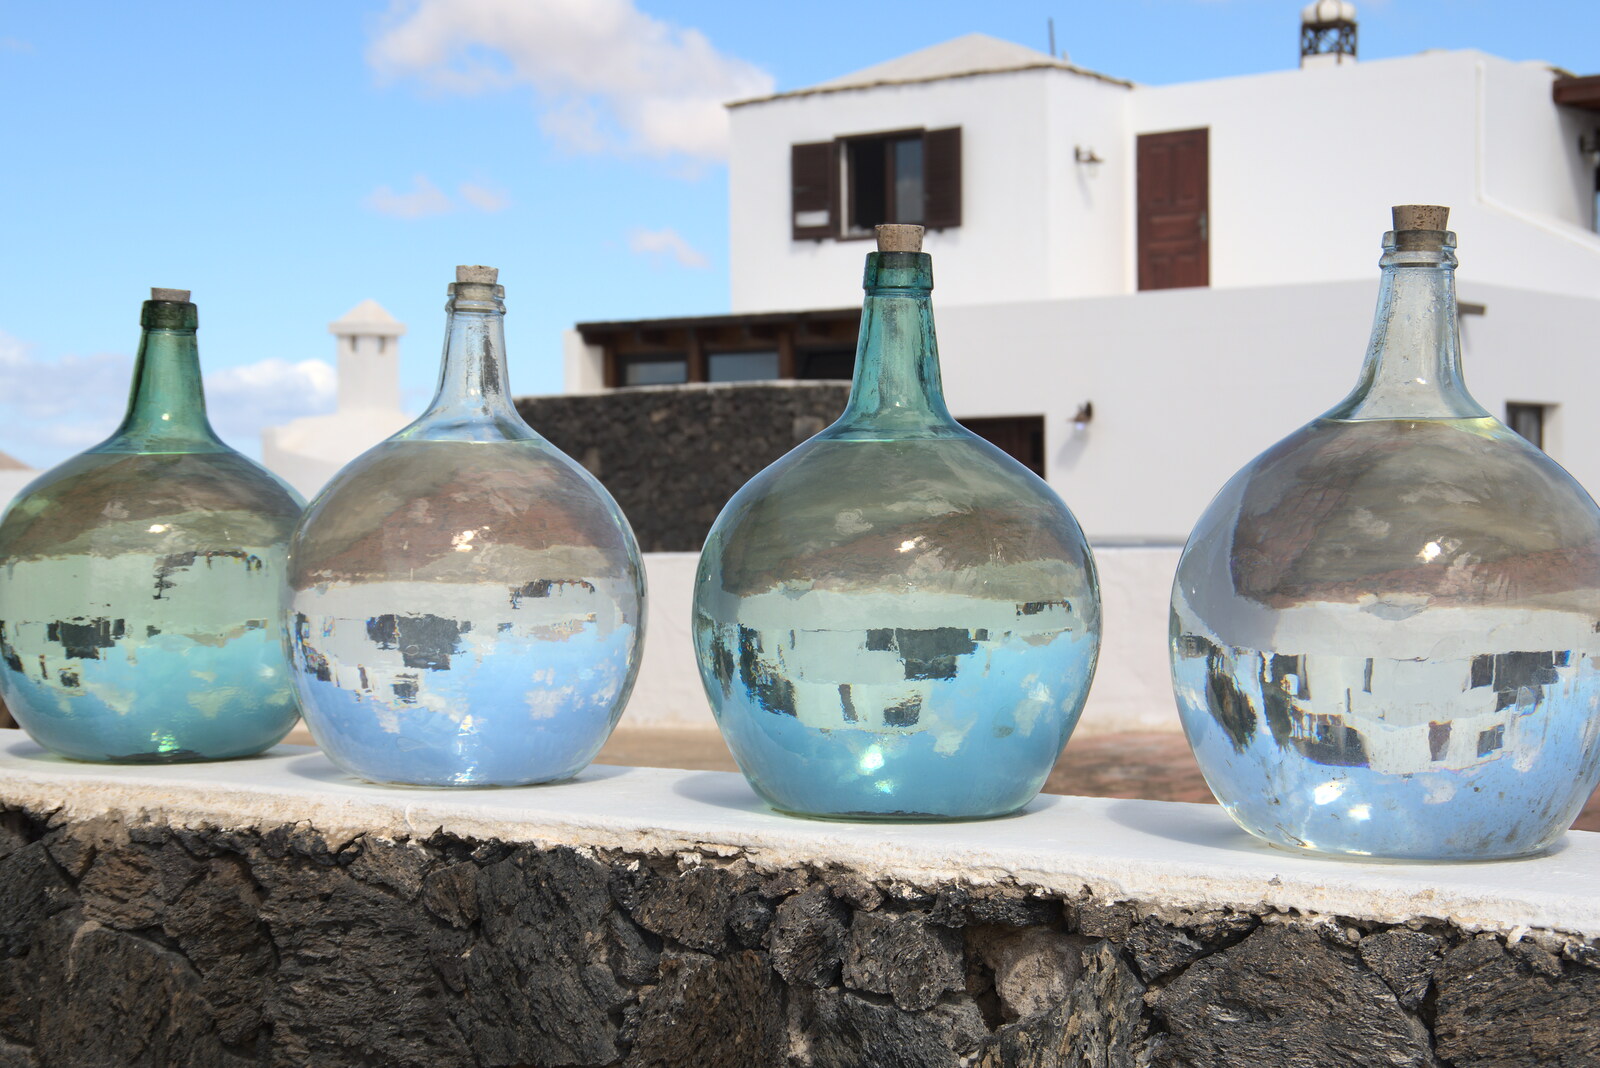 Bottles of water on a wall from The Volcanoes of Lanzarote, Canary Islands, Spain - 27th October 2021